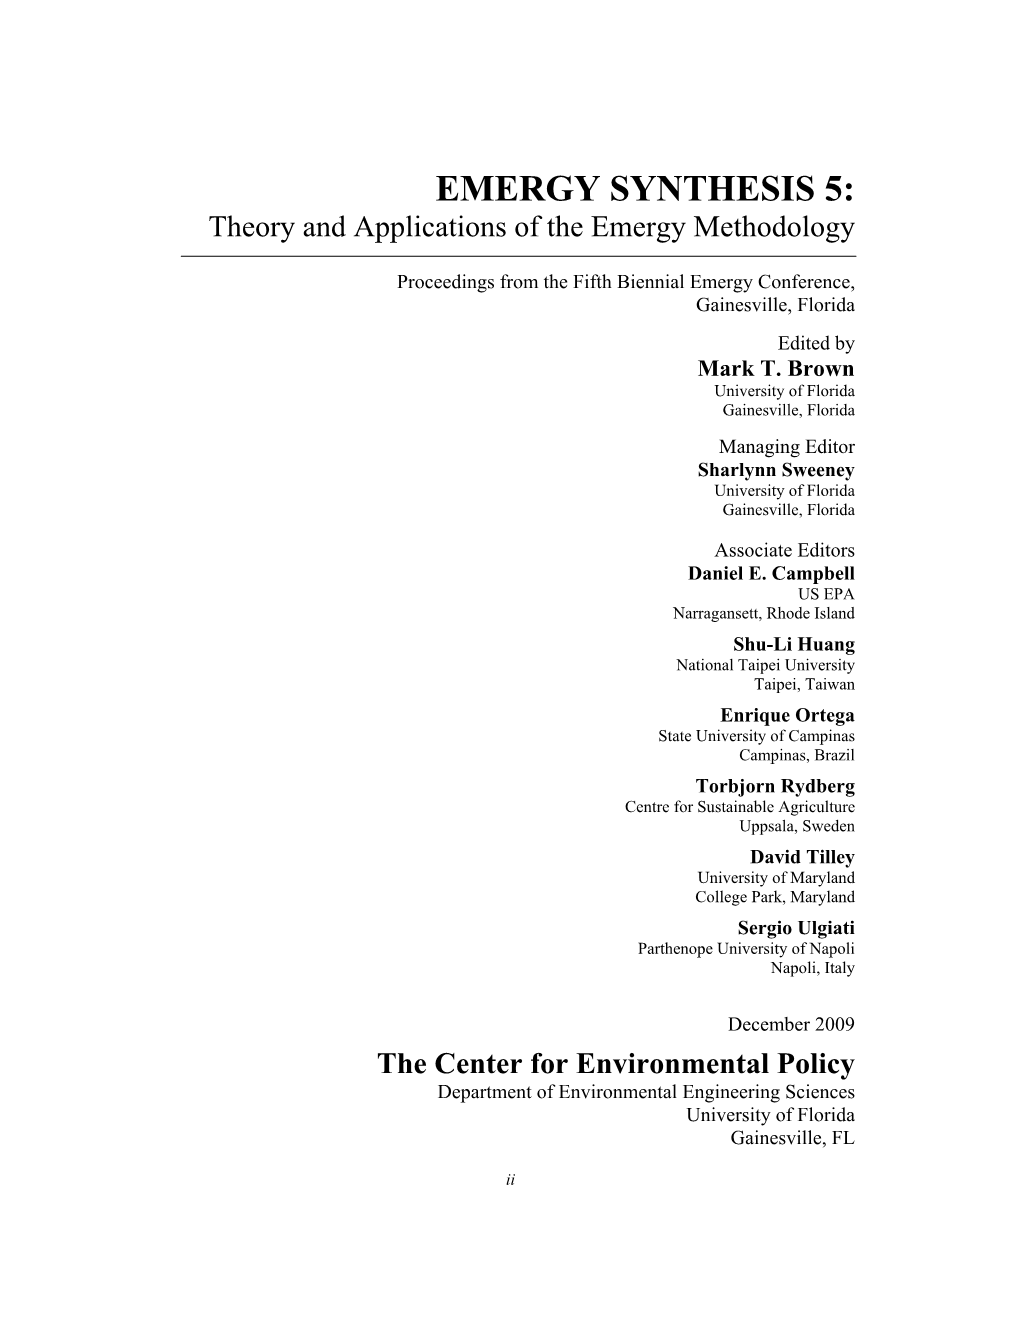 EMERGY SYNTHESIS 5: Theory and Applications of the Emergy Methodology